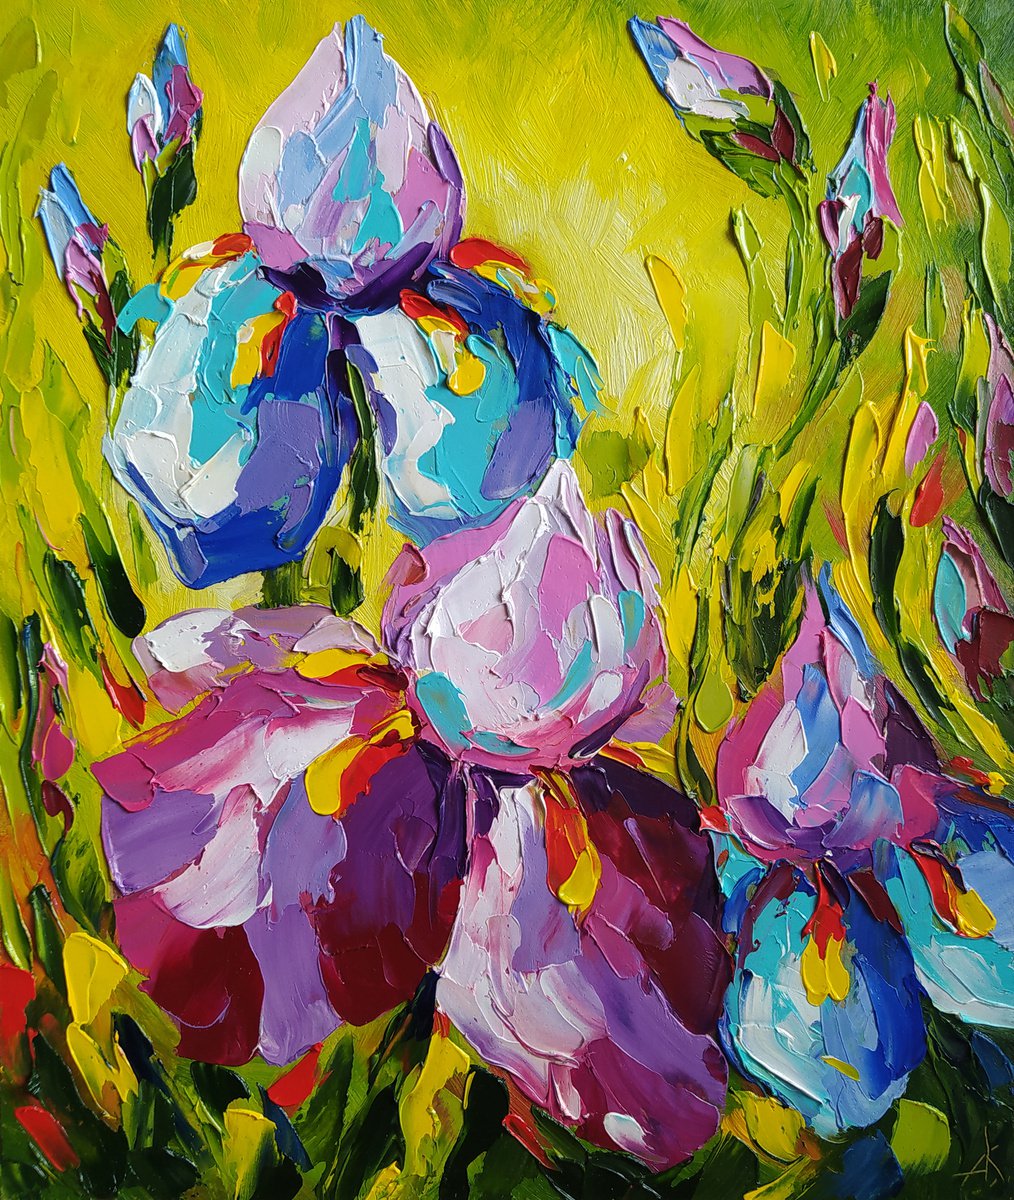 Irises in a sunny day - flowers, oil painting, irises flowers, gift idea, gift for woman by Anastasia Kozorez